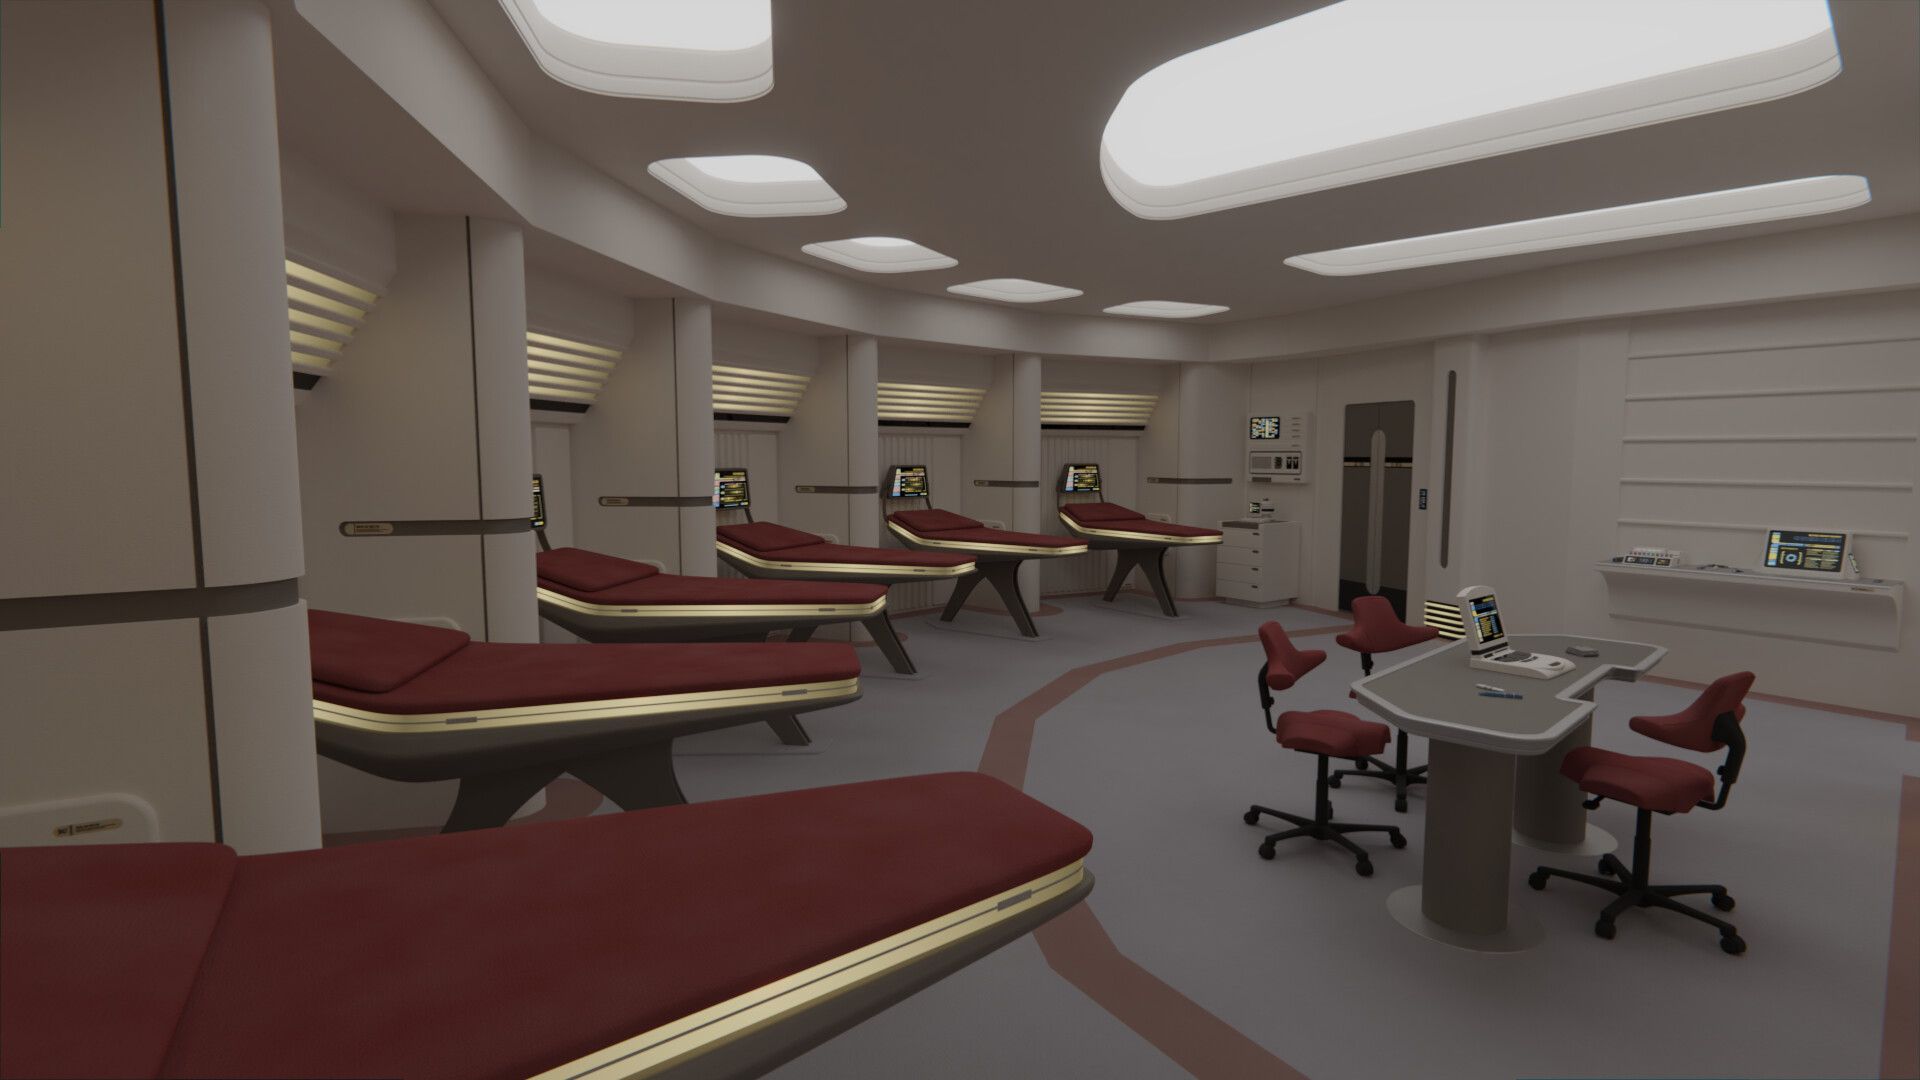 Aft Sickbay, another angle